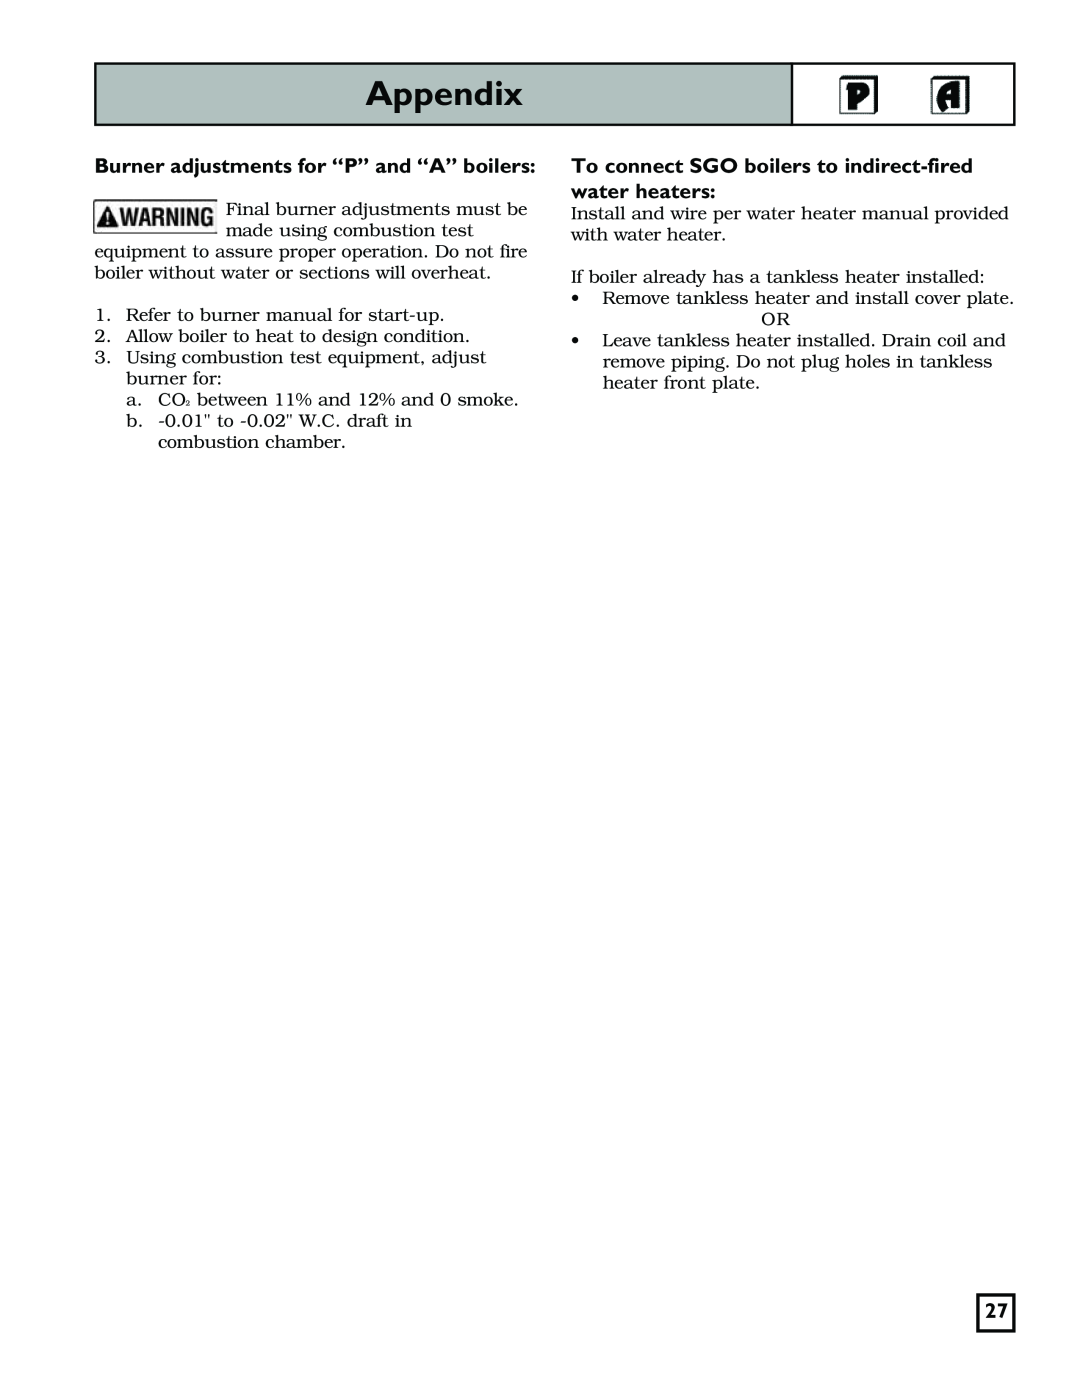 Weil-McLain 550-141-829/1201 manual Appendix, Burner adjustments for “P” and “A” boilers 